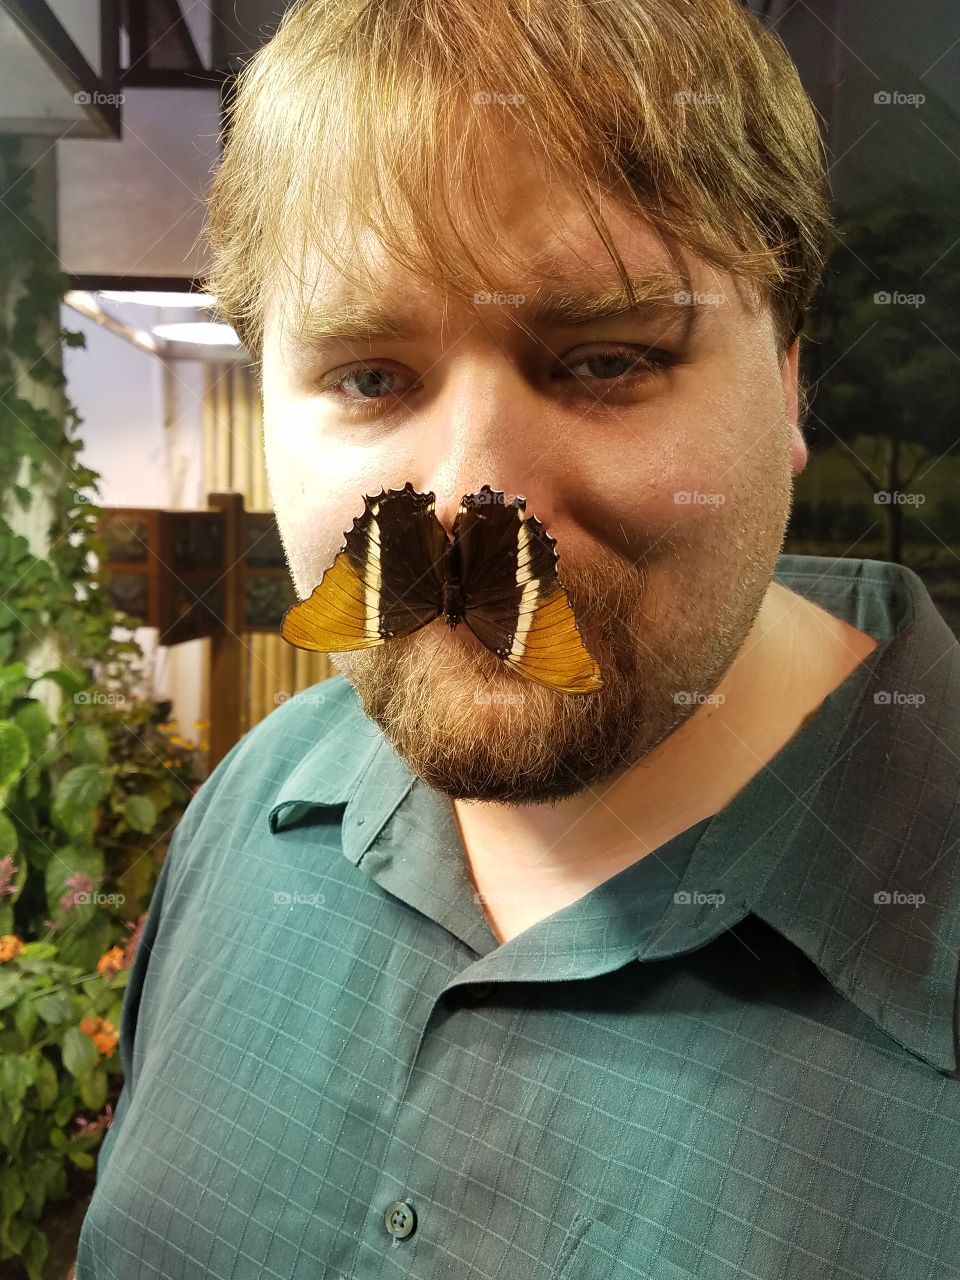 Butterfly on man's face